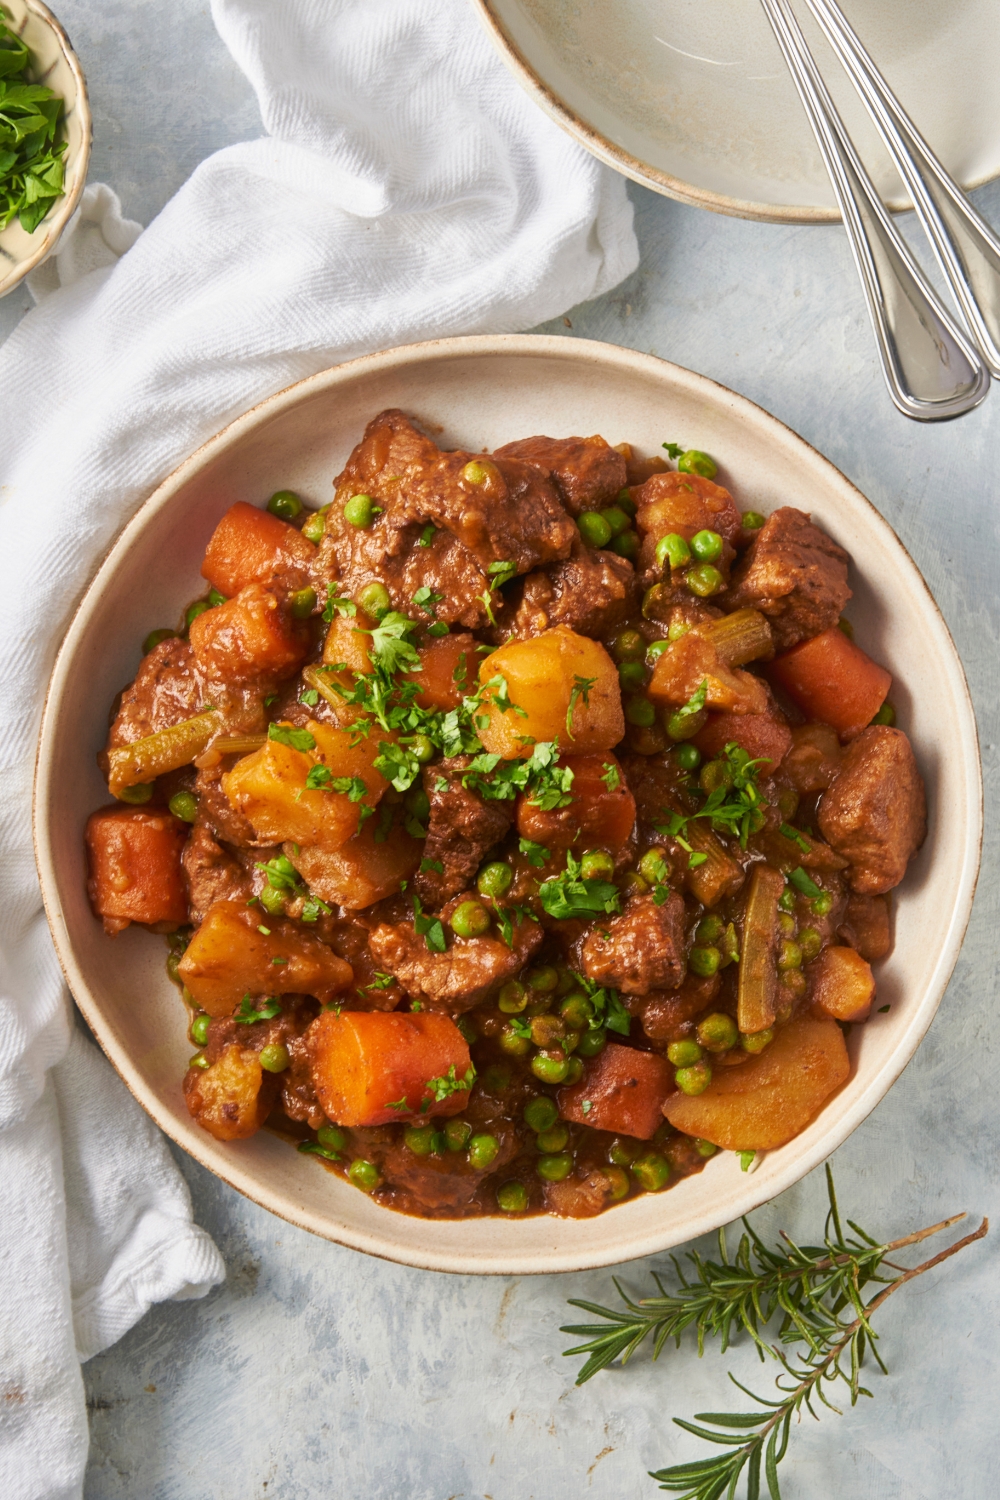 Potatoes, carrots, peas and stew meat on a white plate.